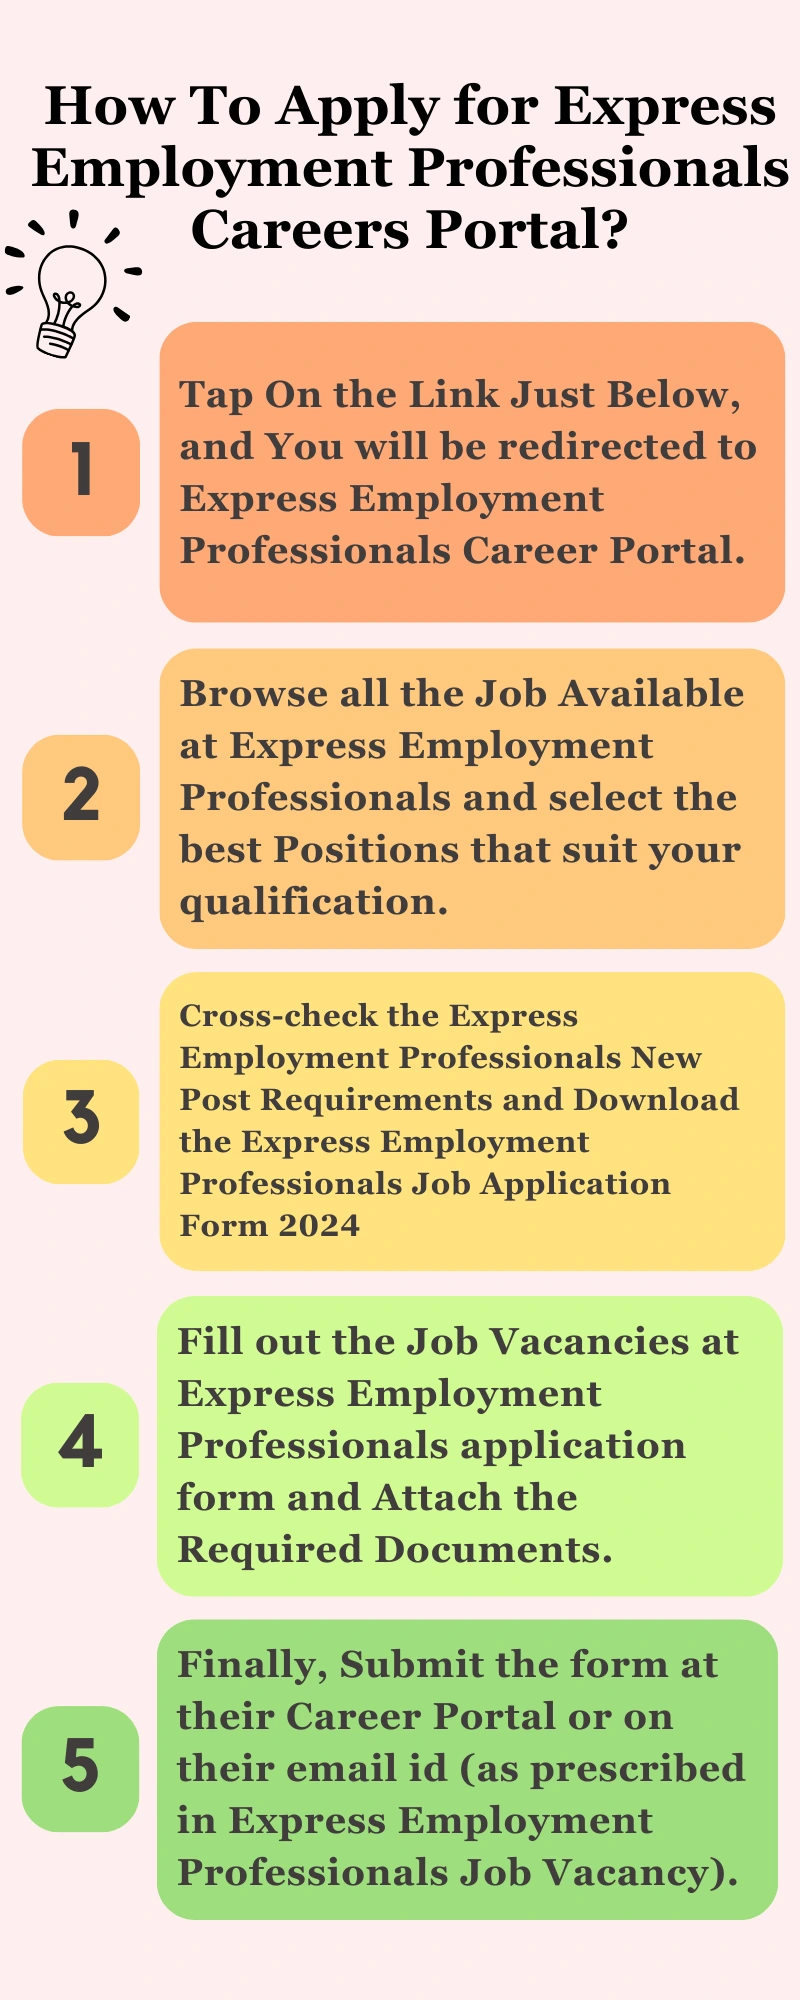 How To Apply for Express Employment Professionals Careers Portal?